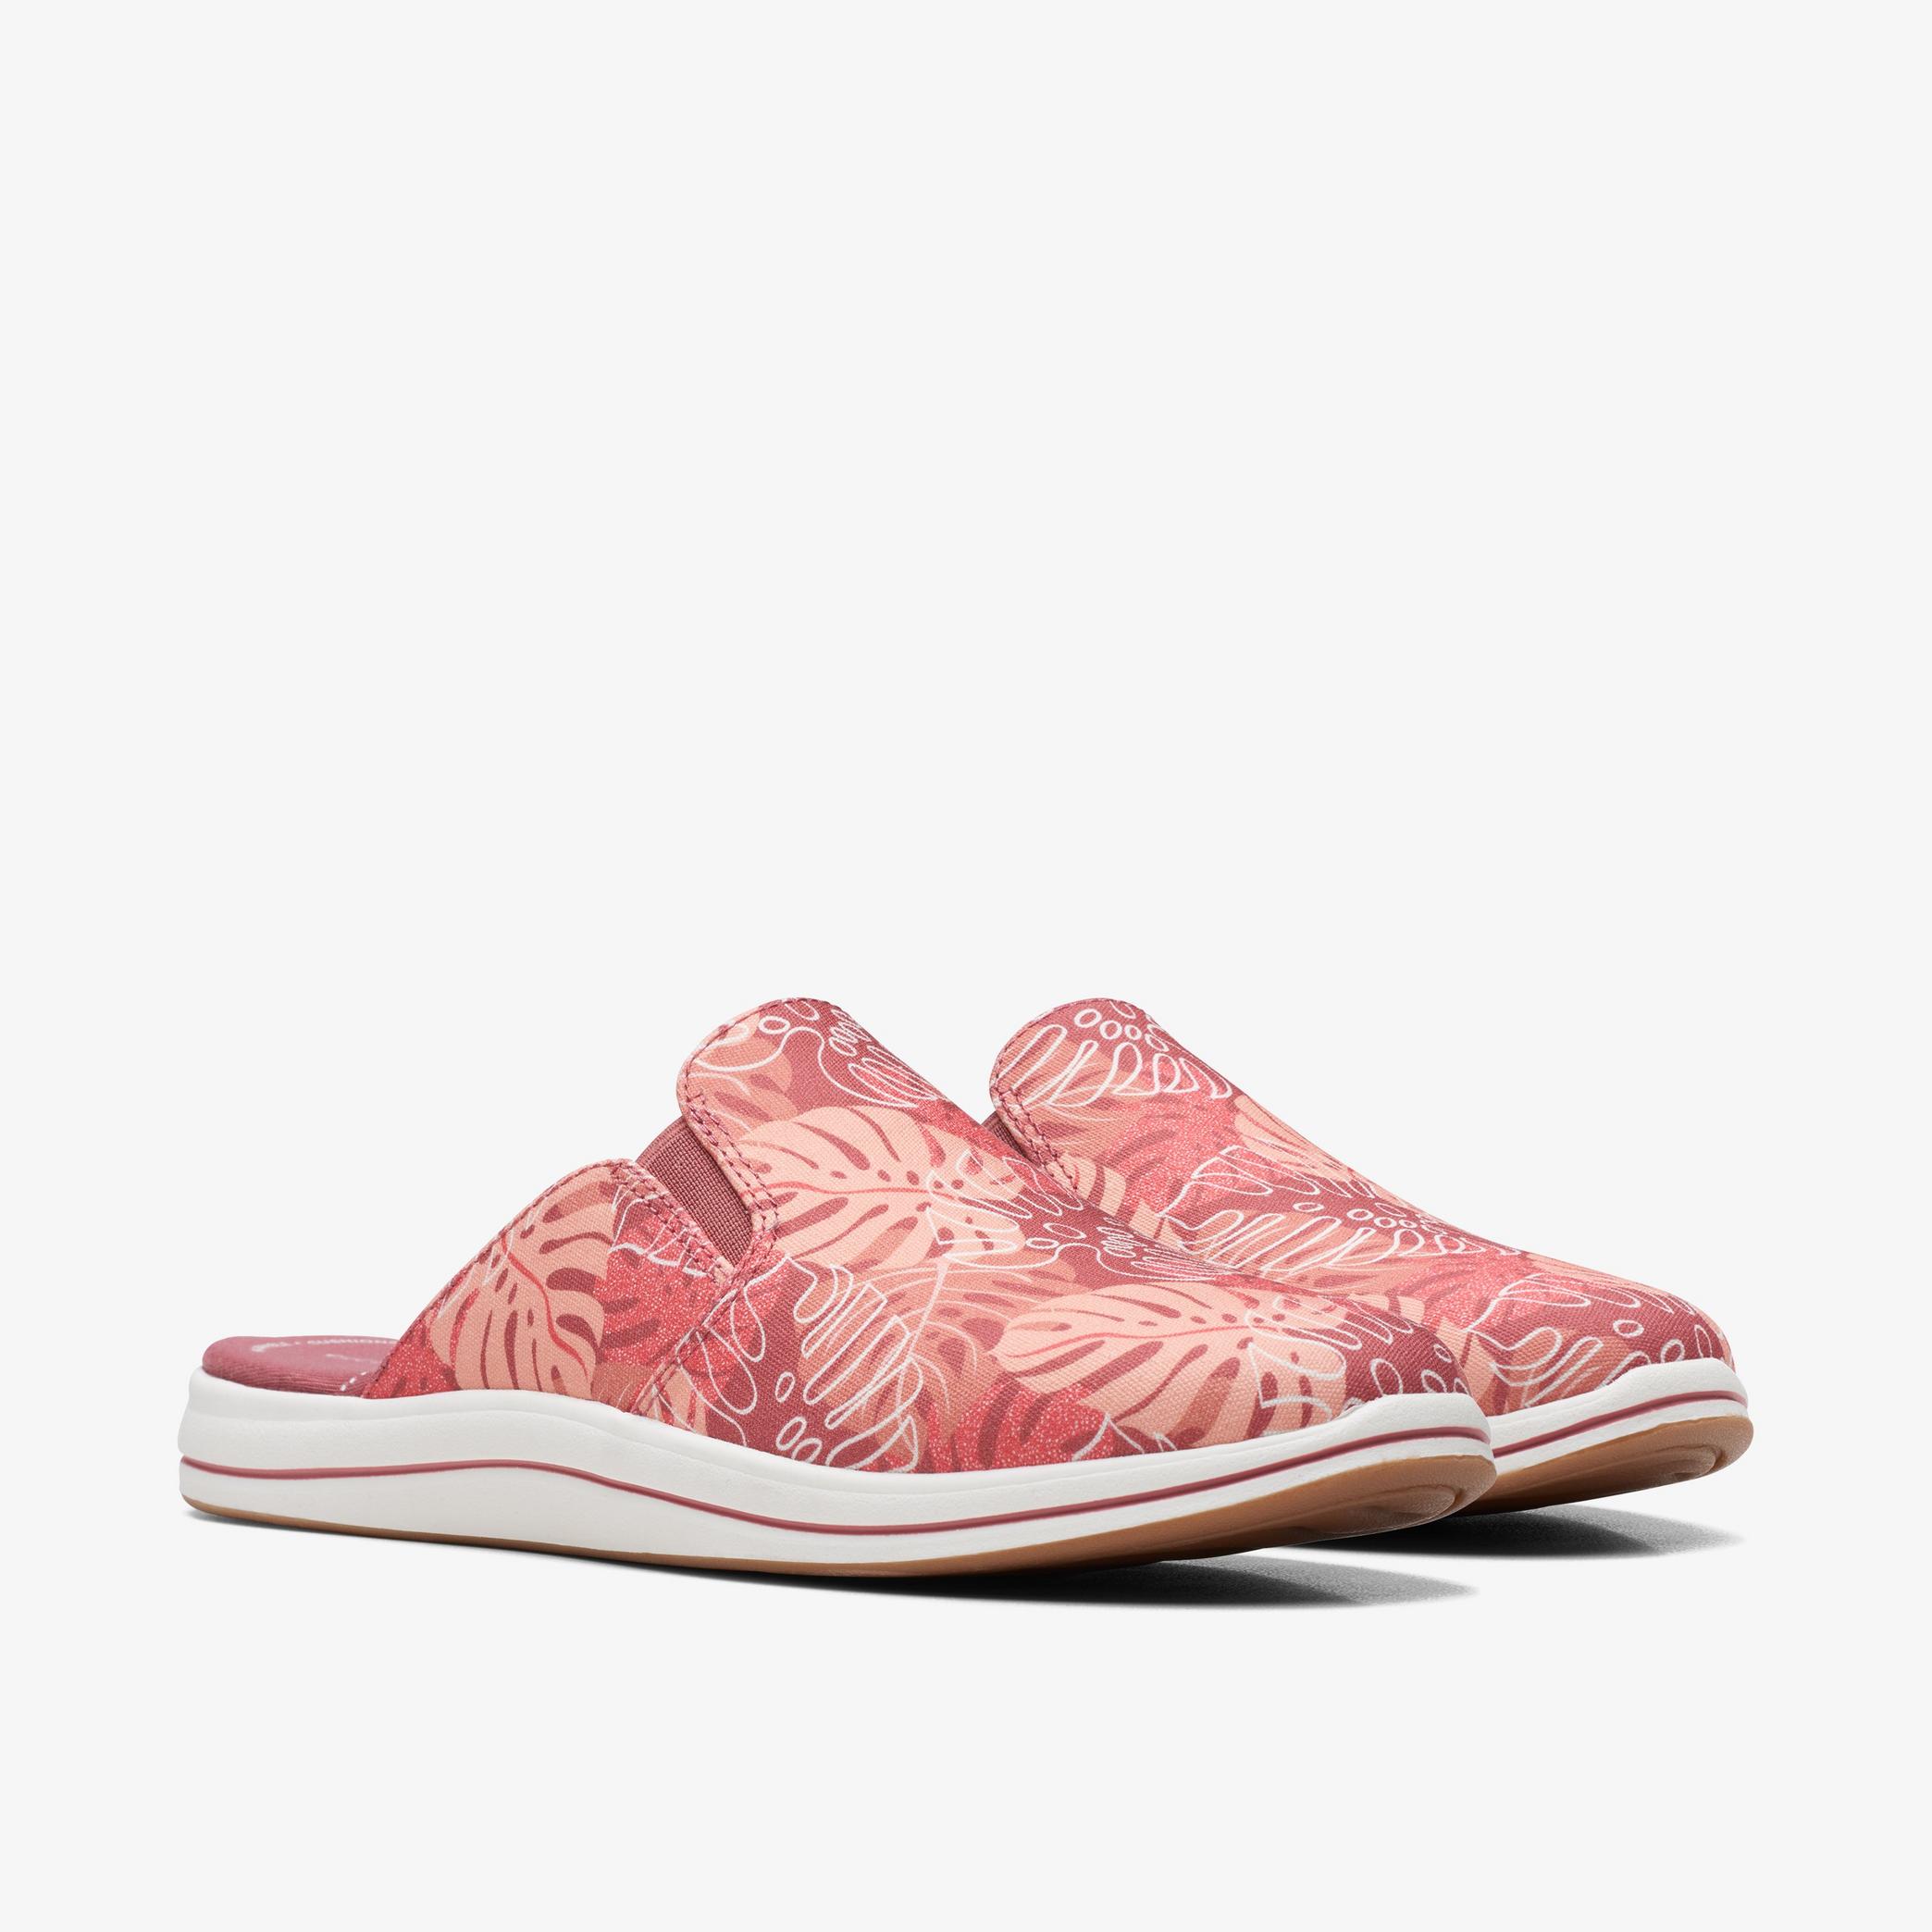 Clarks Women's Breeze Shore Slip-On Shoes (various) $30 + Free Shipping